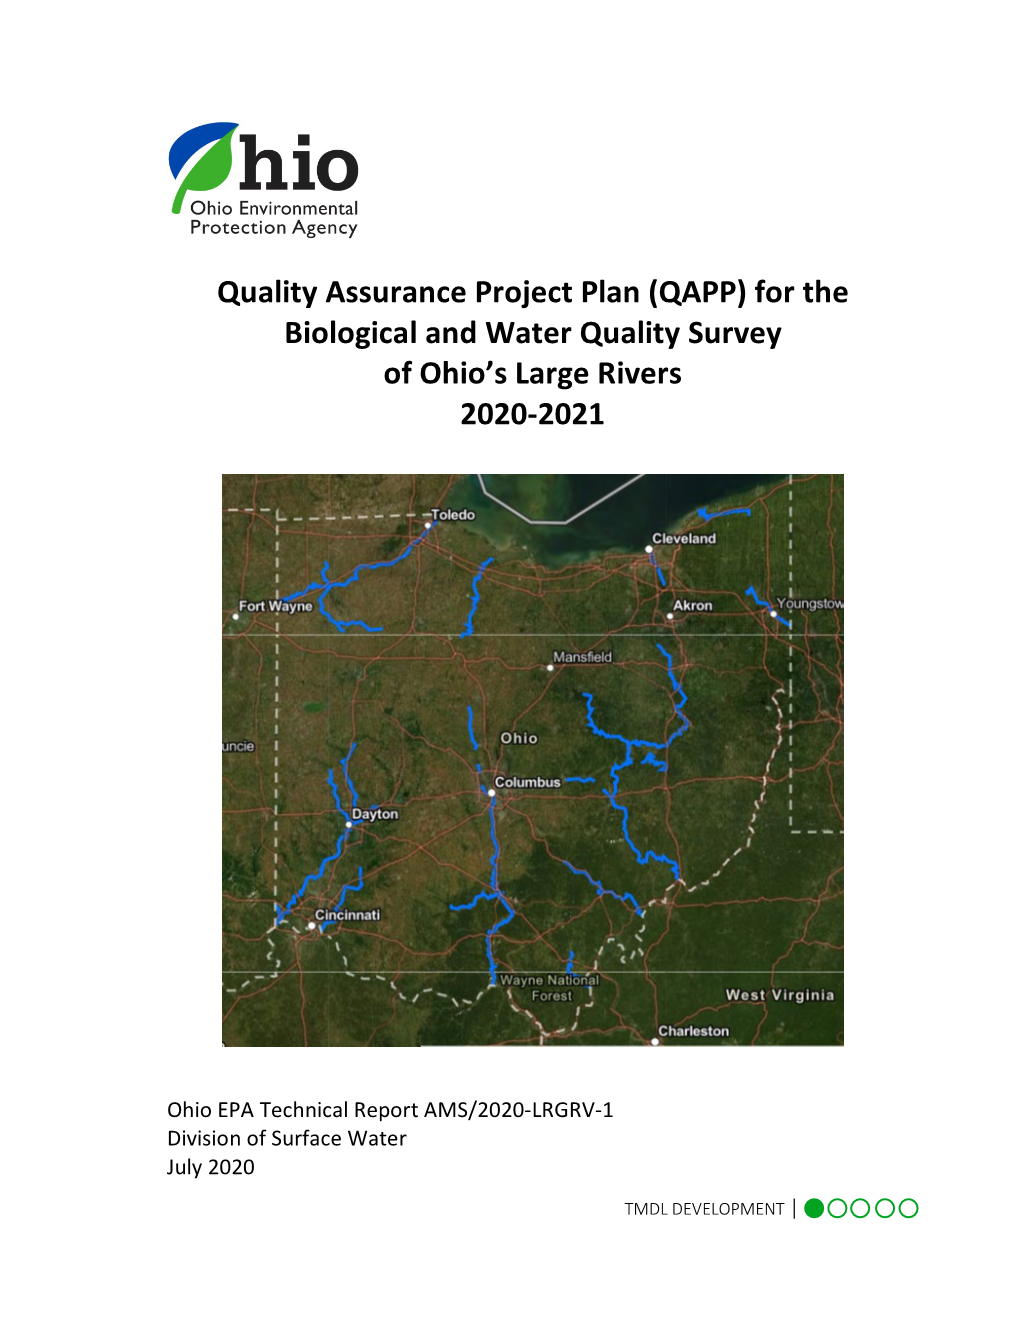 Ohio's Large River Biological and Water Quality Study 2020-2021